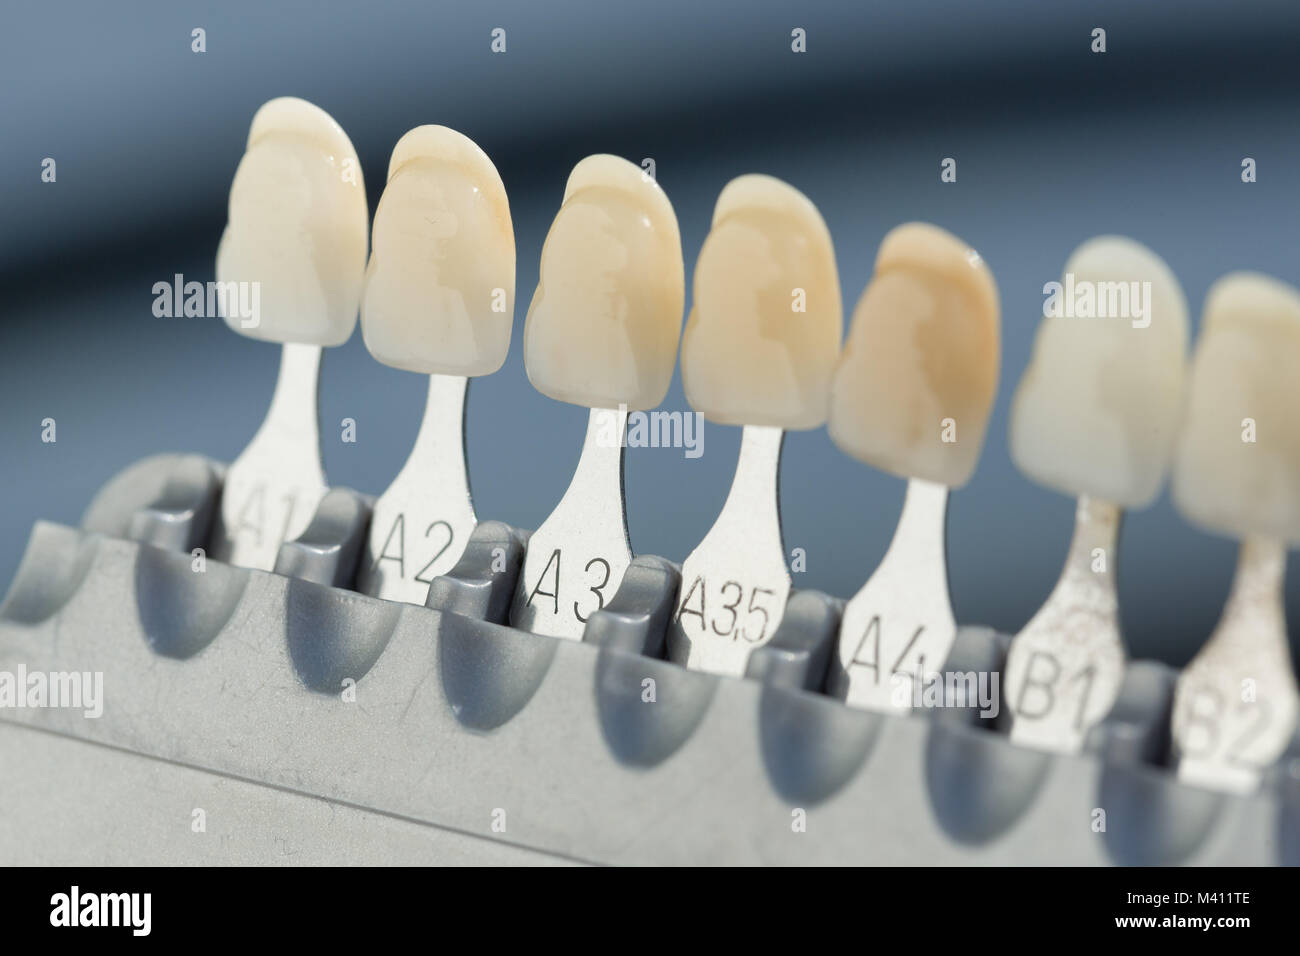 shade guide to check veneer of tooth crown in a dental laboratory Stock Photo